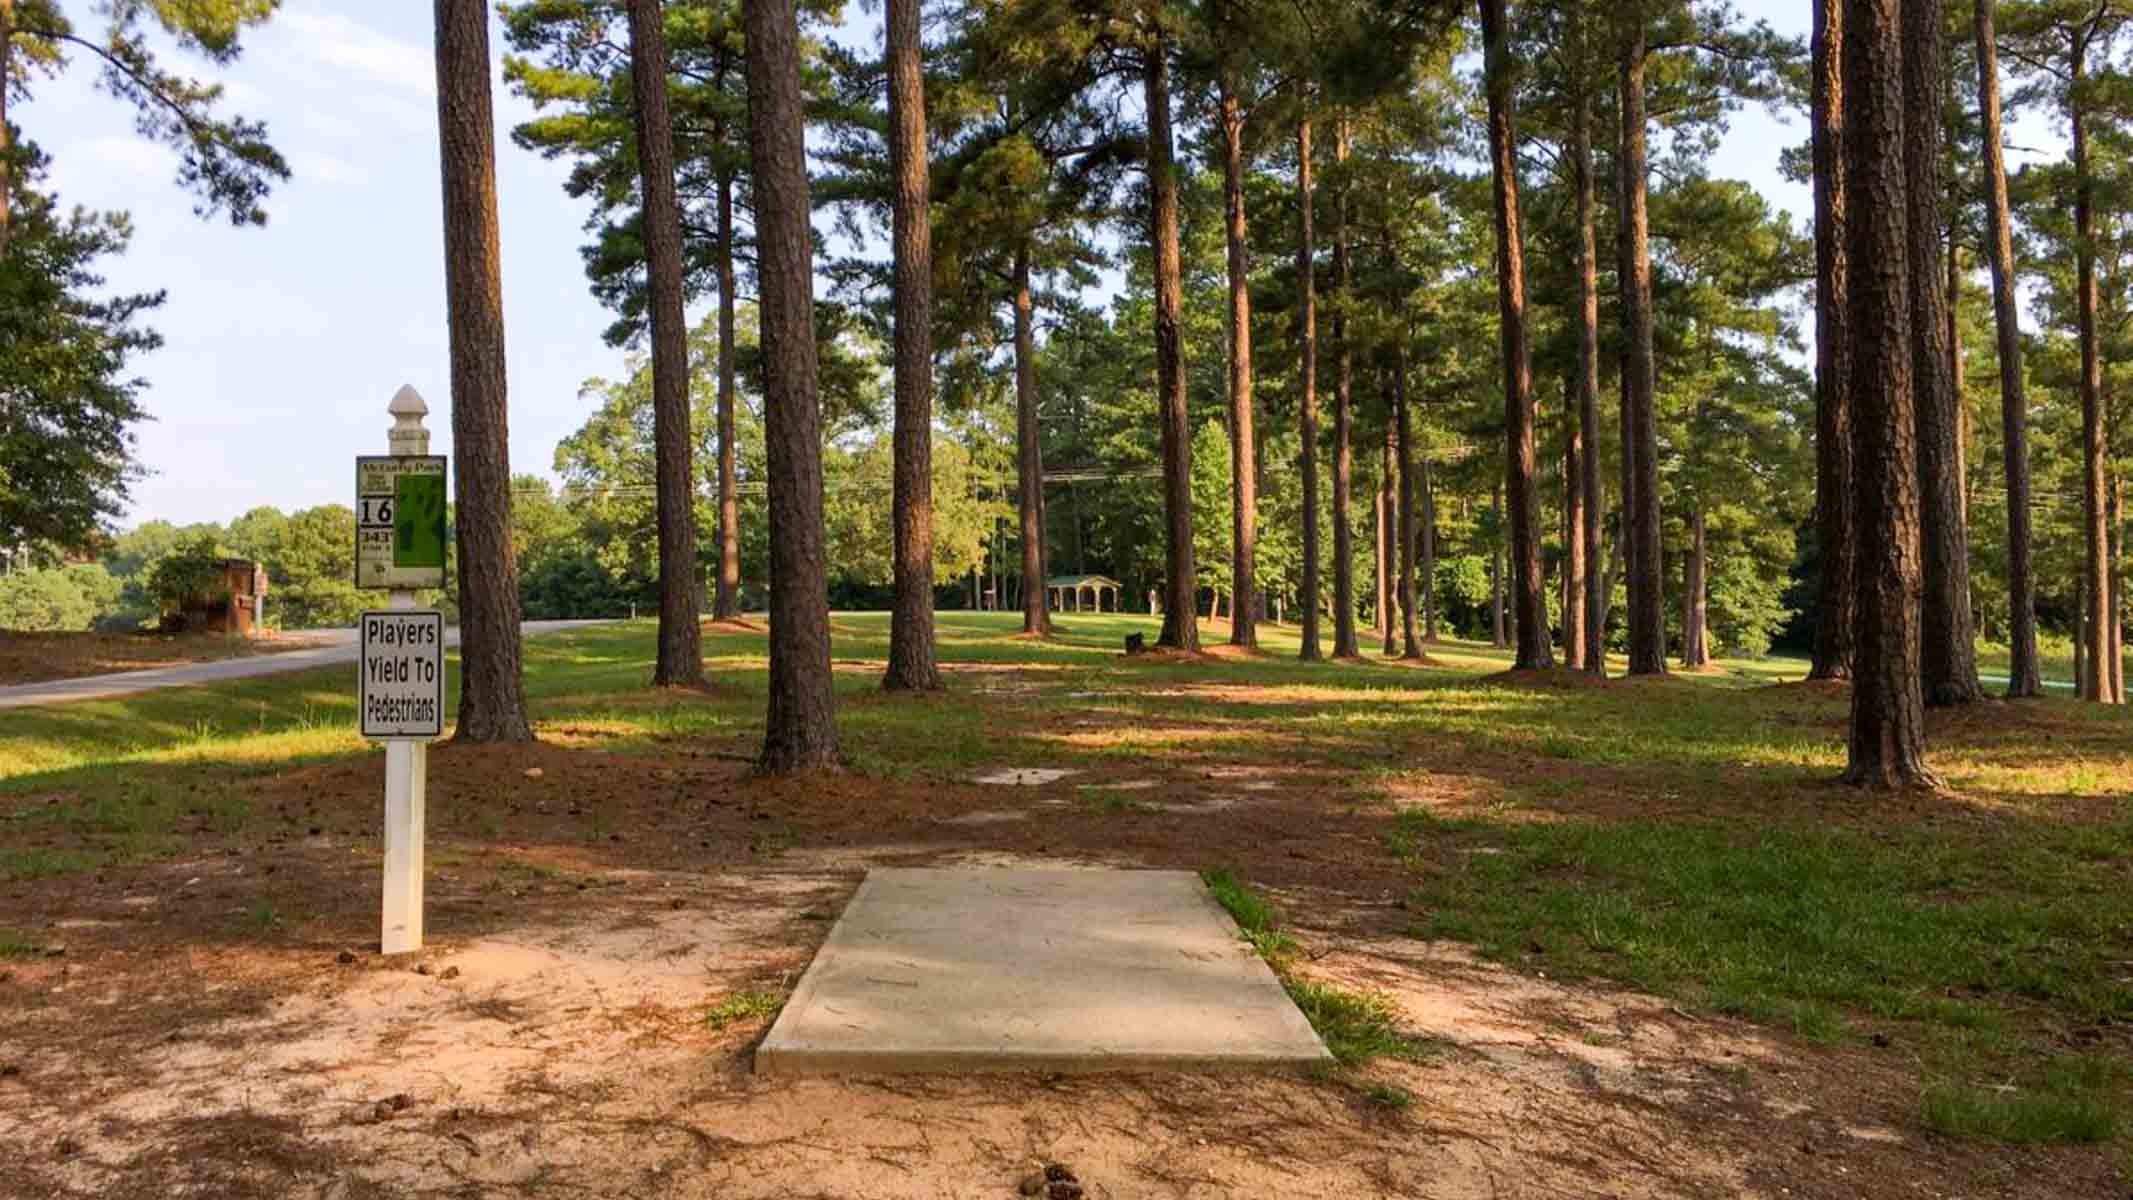 The hole six tee pad at McCurry Park Disc Golf Course